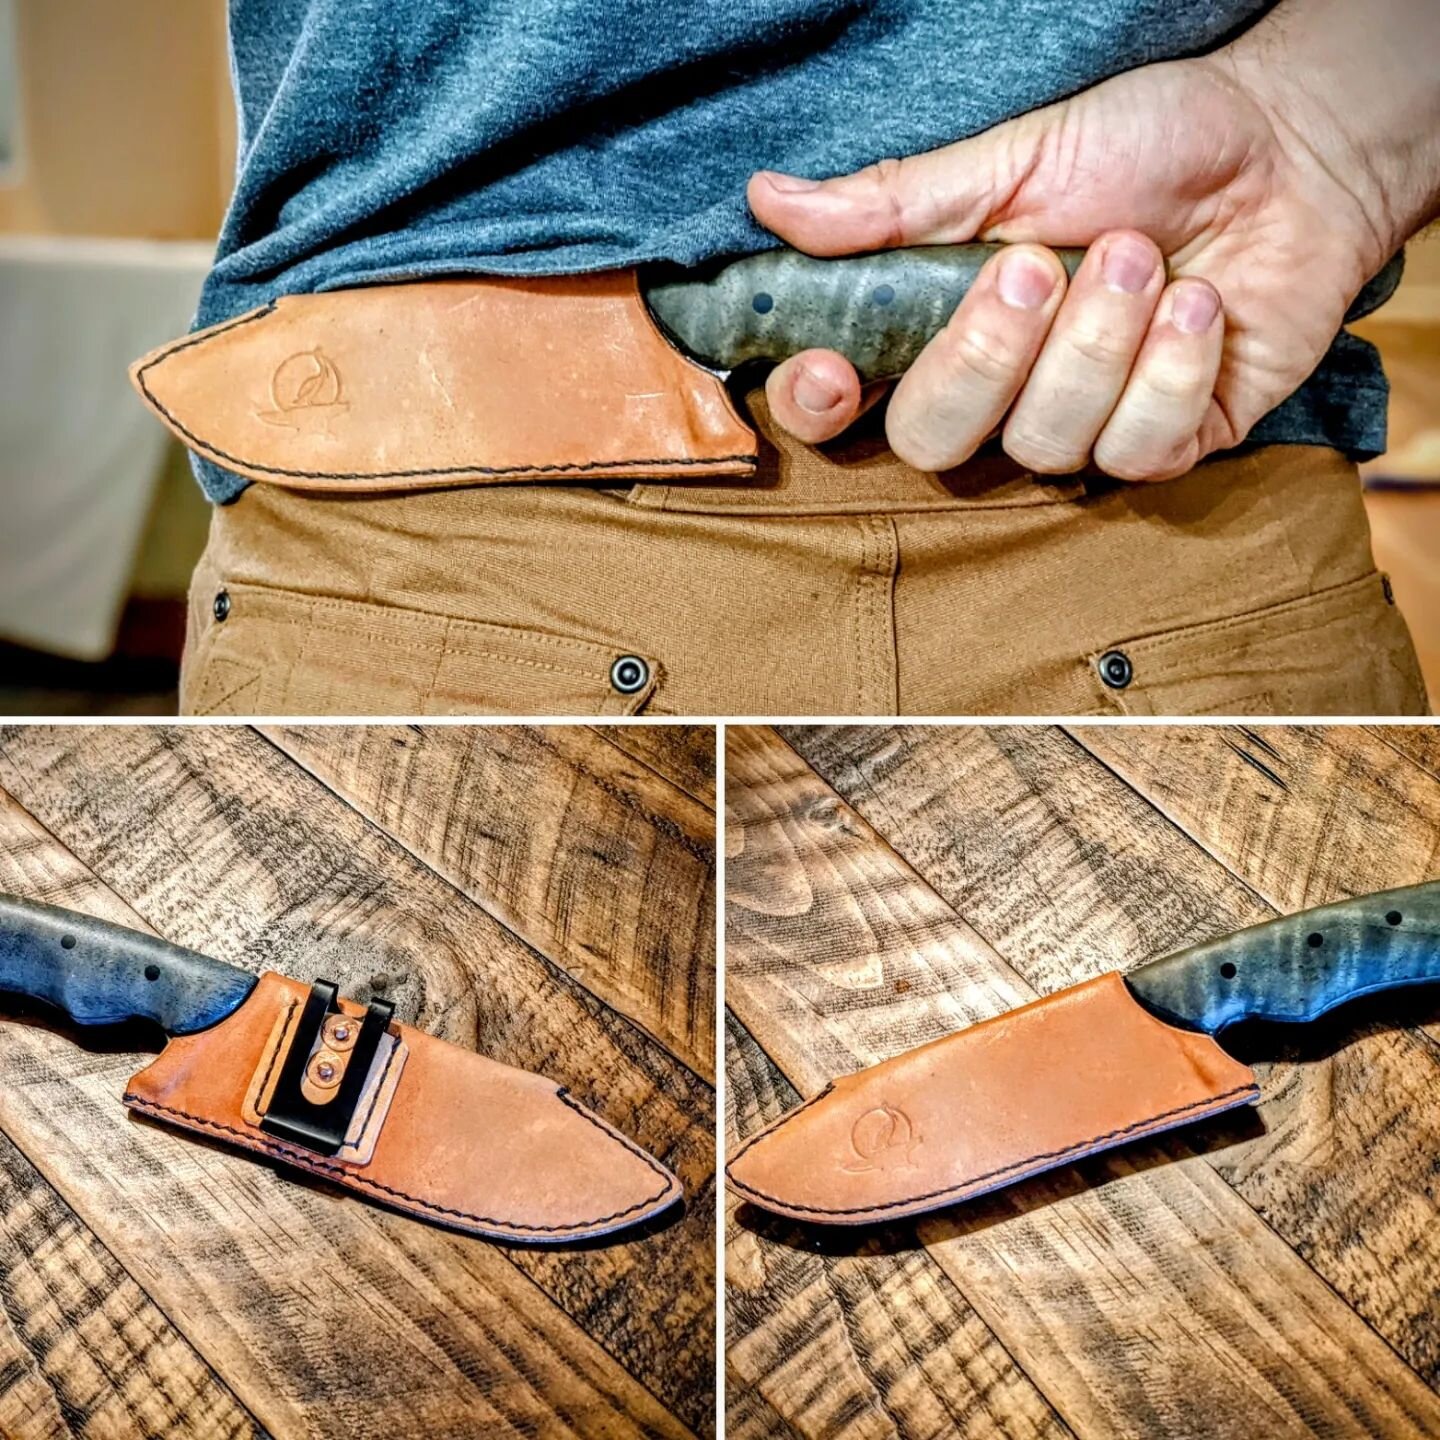 Horizontal slip-fit sheath can be worn with or without a belt. Designed for a behind the back carry. Mink oil treated vegtan from @hermannoakleather and @mainethread waxed thread in black 👌

#leather 
#leathercraft 
#leatherwork 
#vegtan 
#saddlesti